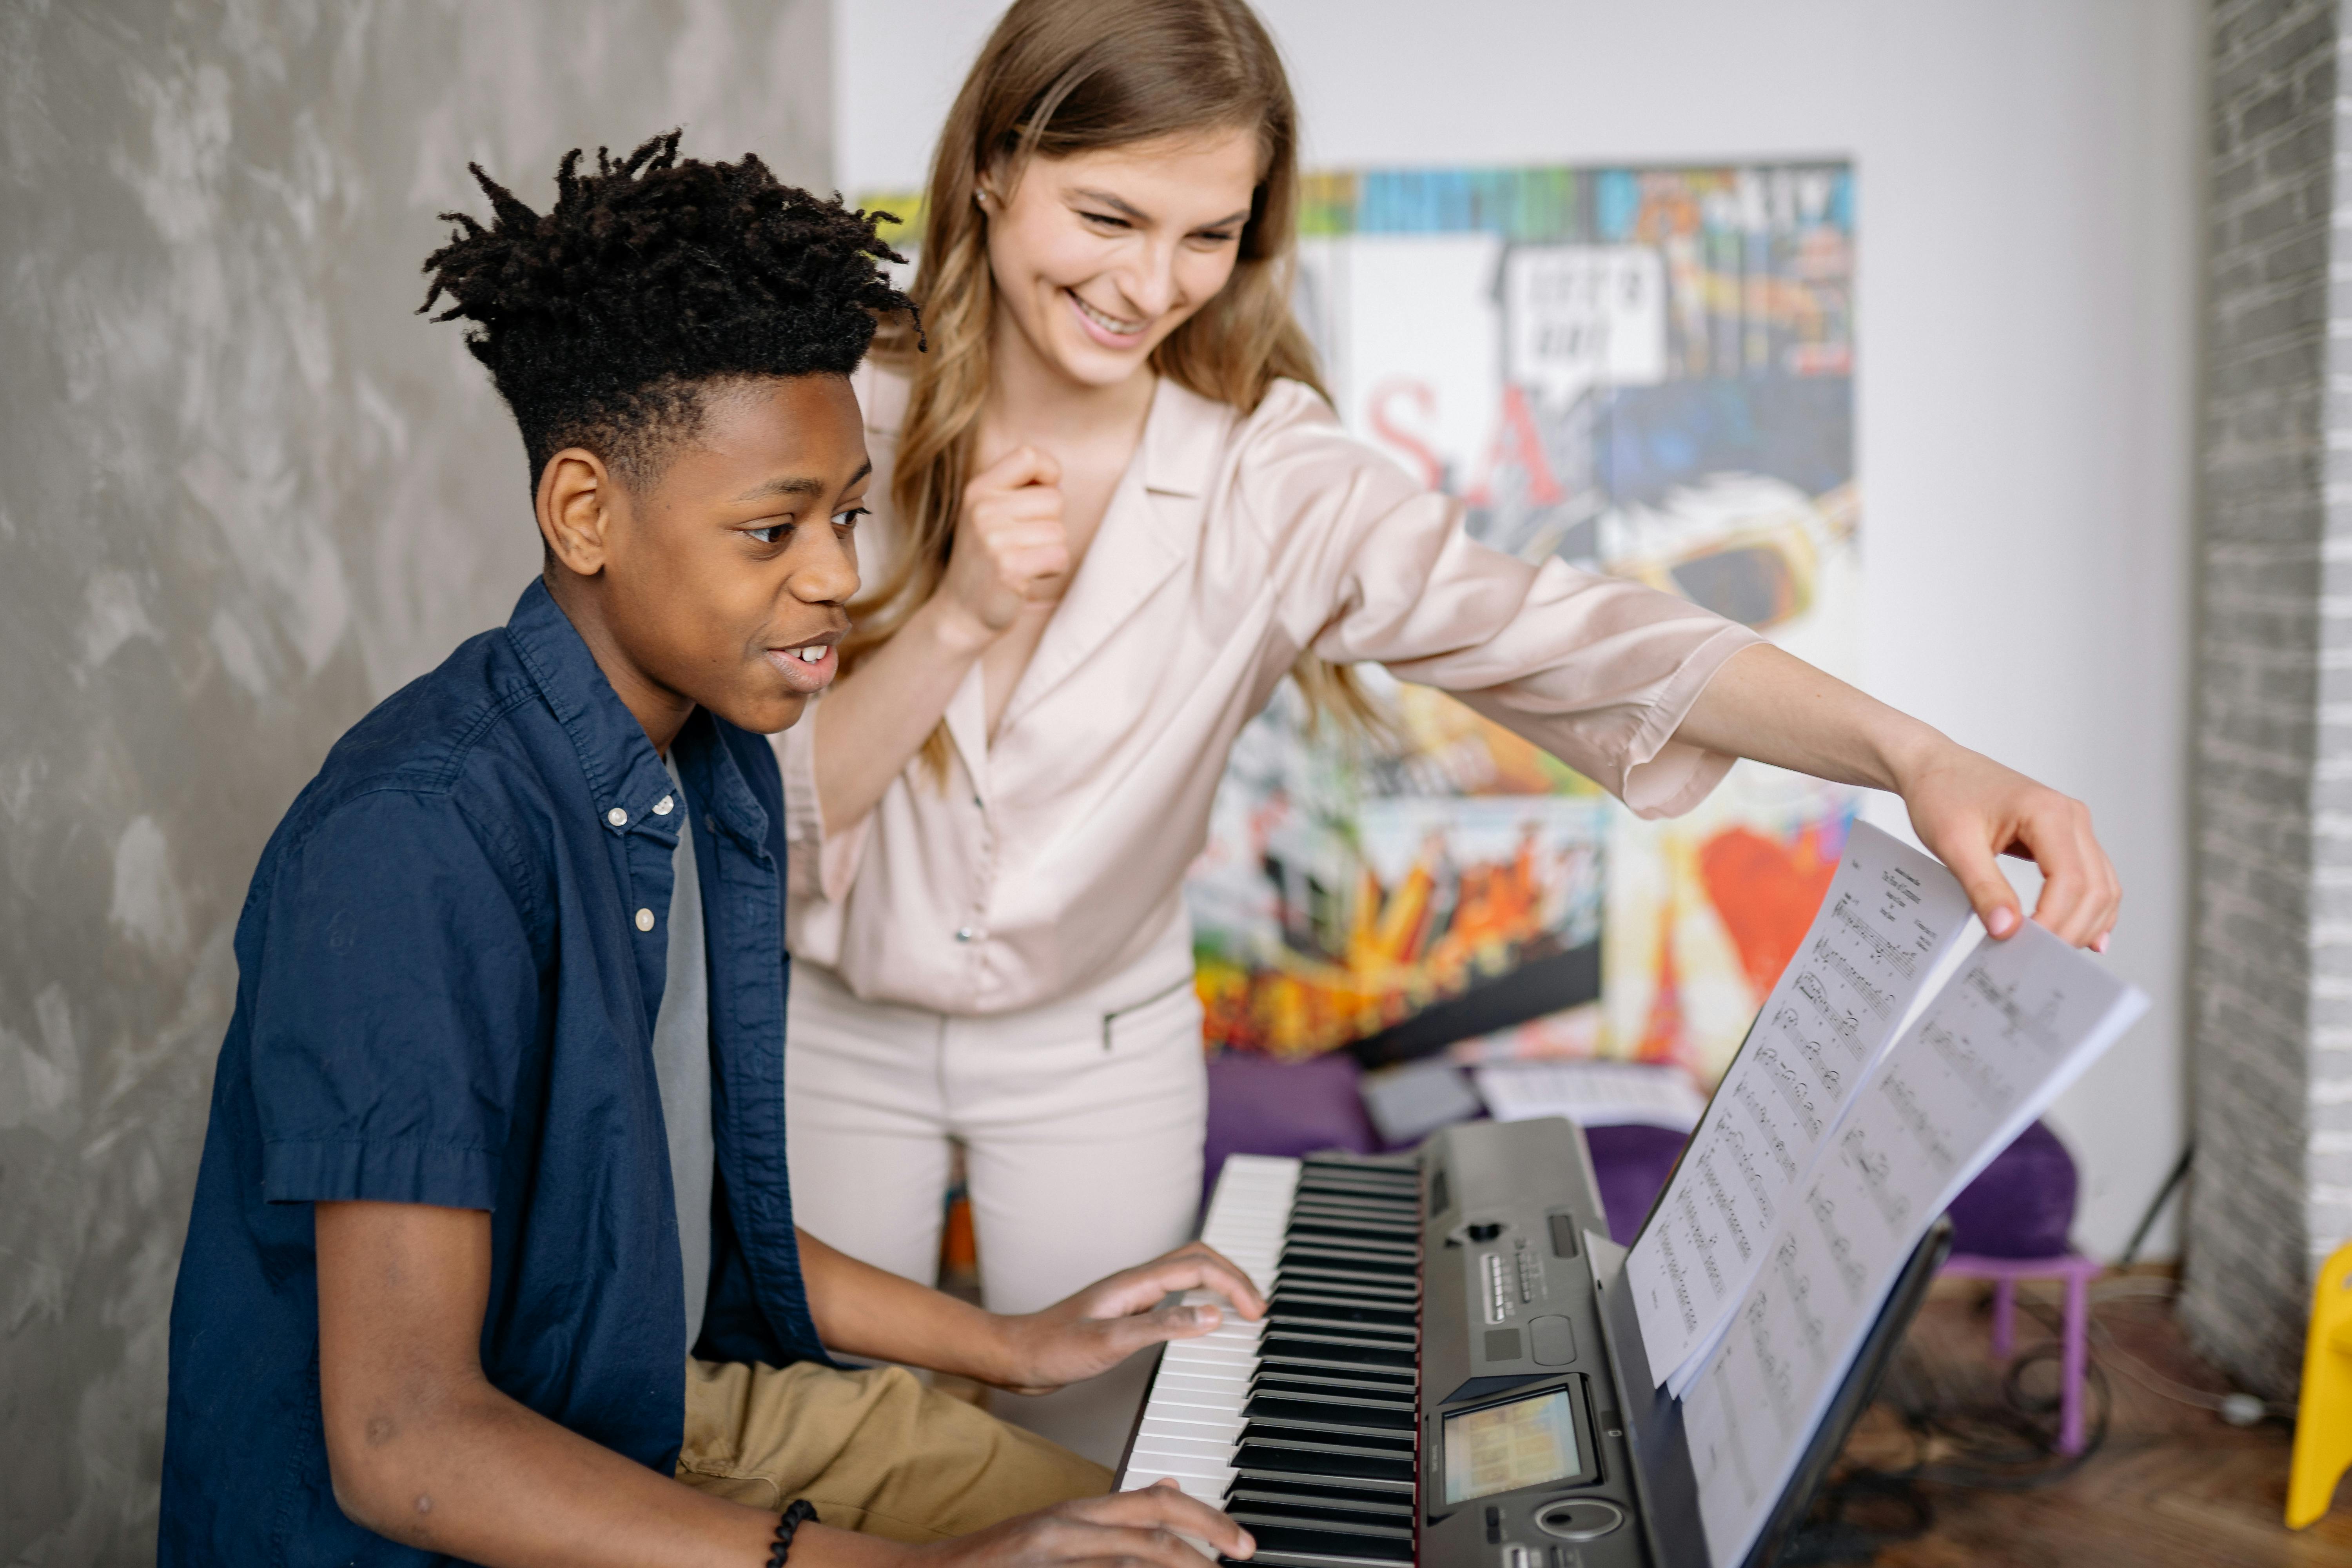 A young student with a focused expression plays a keyboard while a smiling teacher stands beside him, gesturing encouragingly and holding a sheet of music. The background features colorful artwork, suggesting a creative and supportive learning environment.